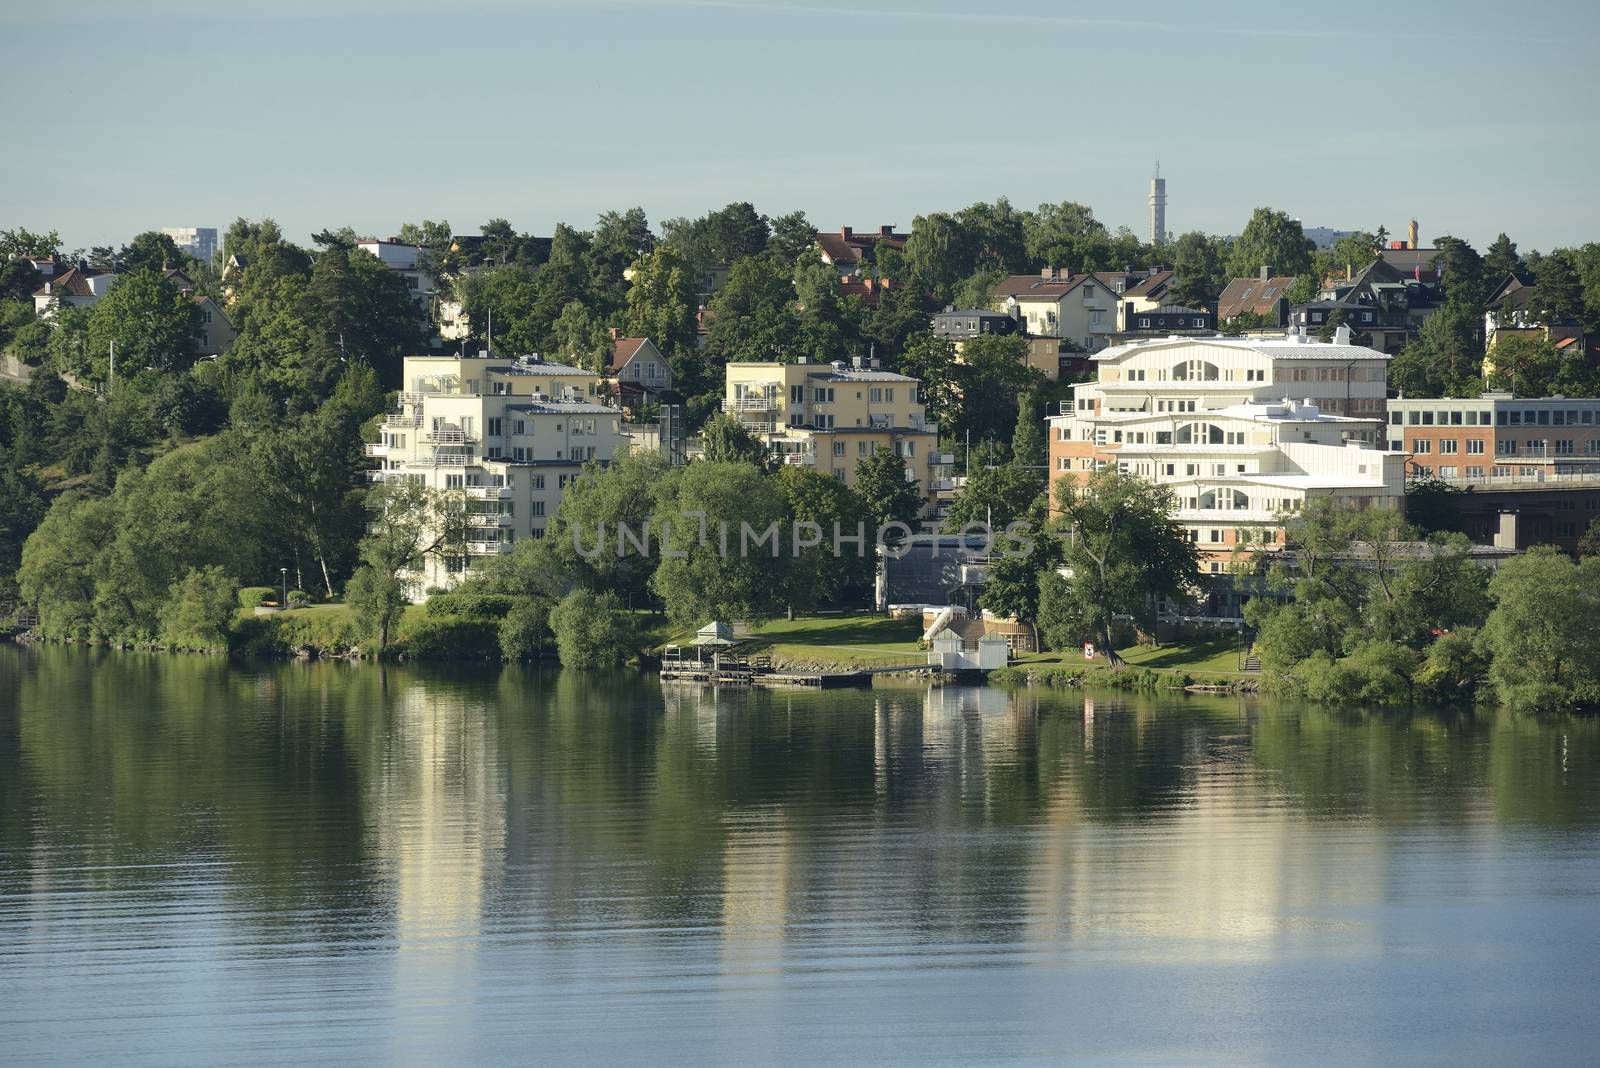 Stockholm embankment by a40757